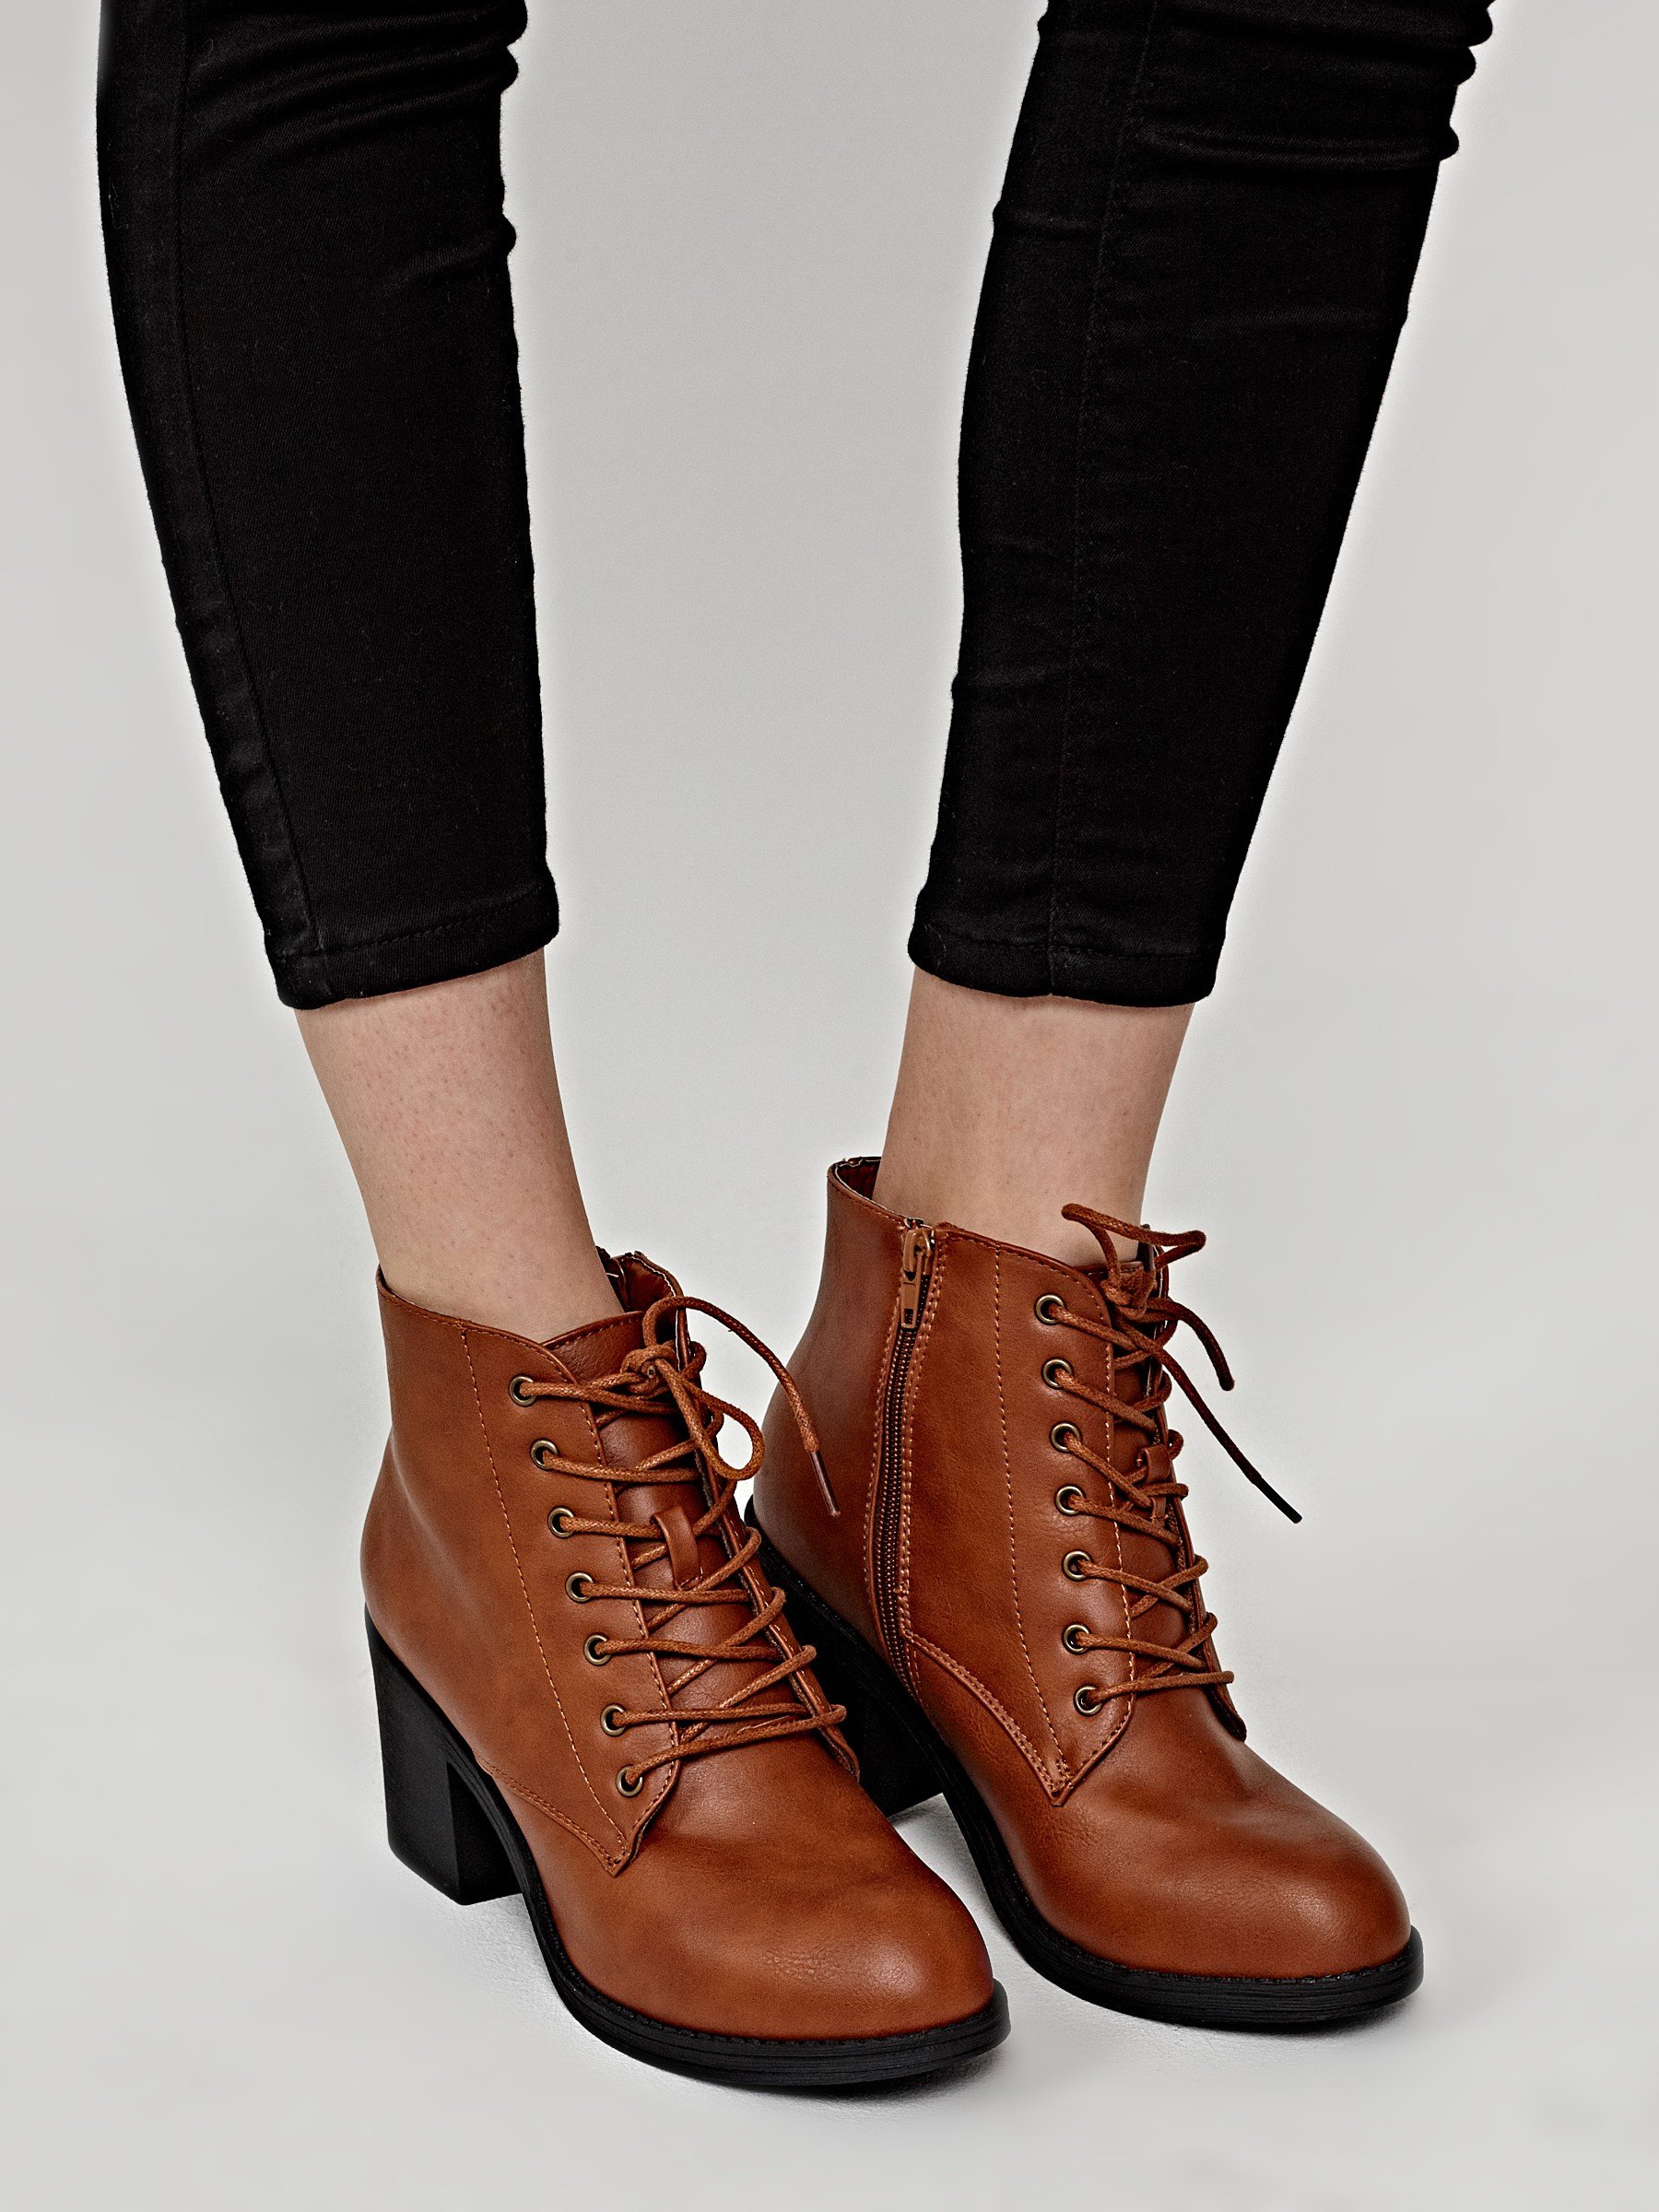 lace up ankle boots outfit